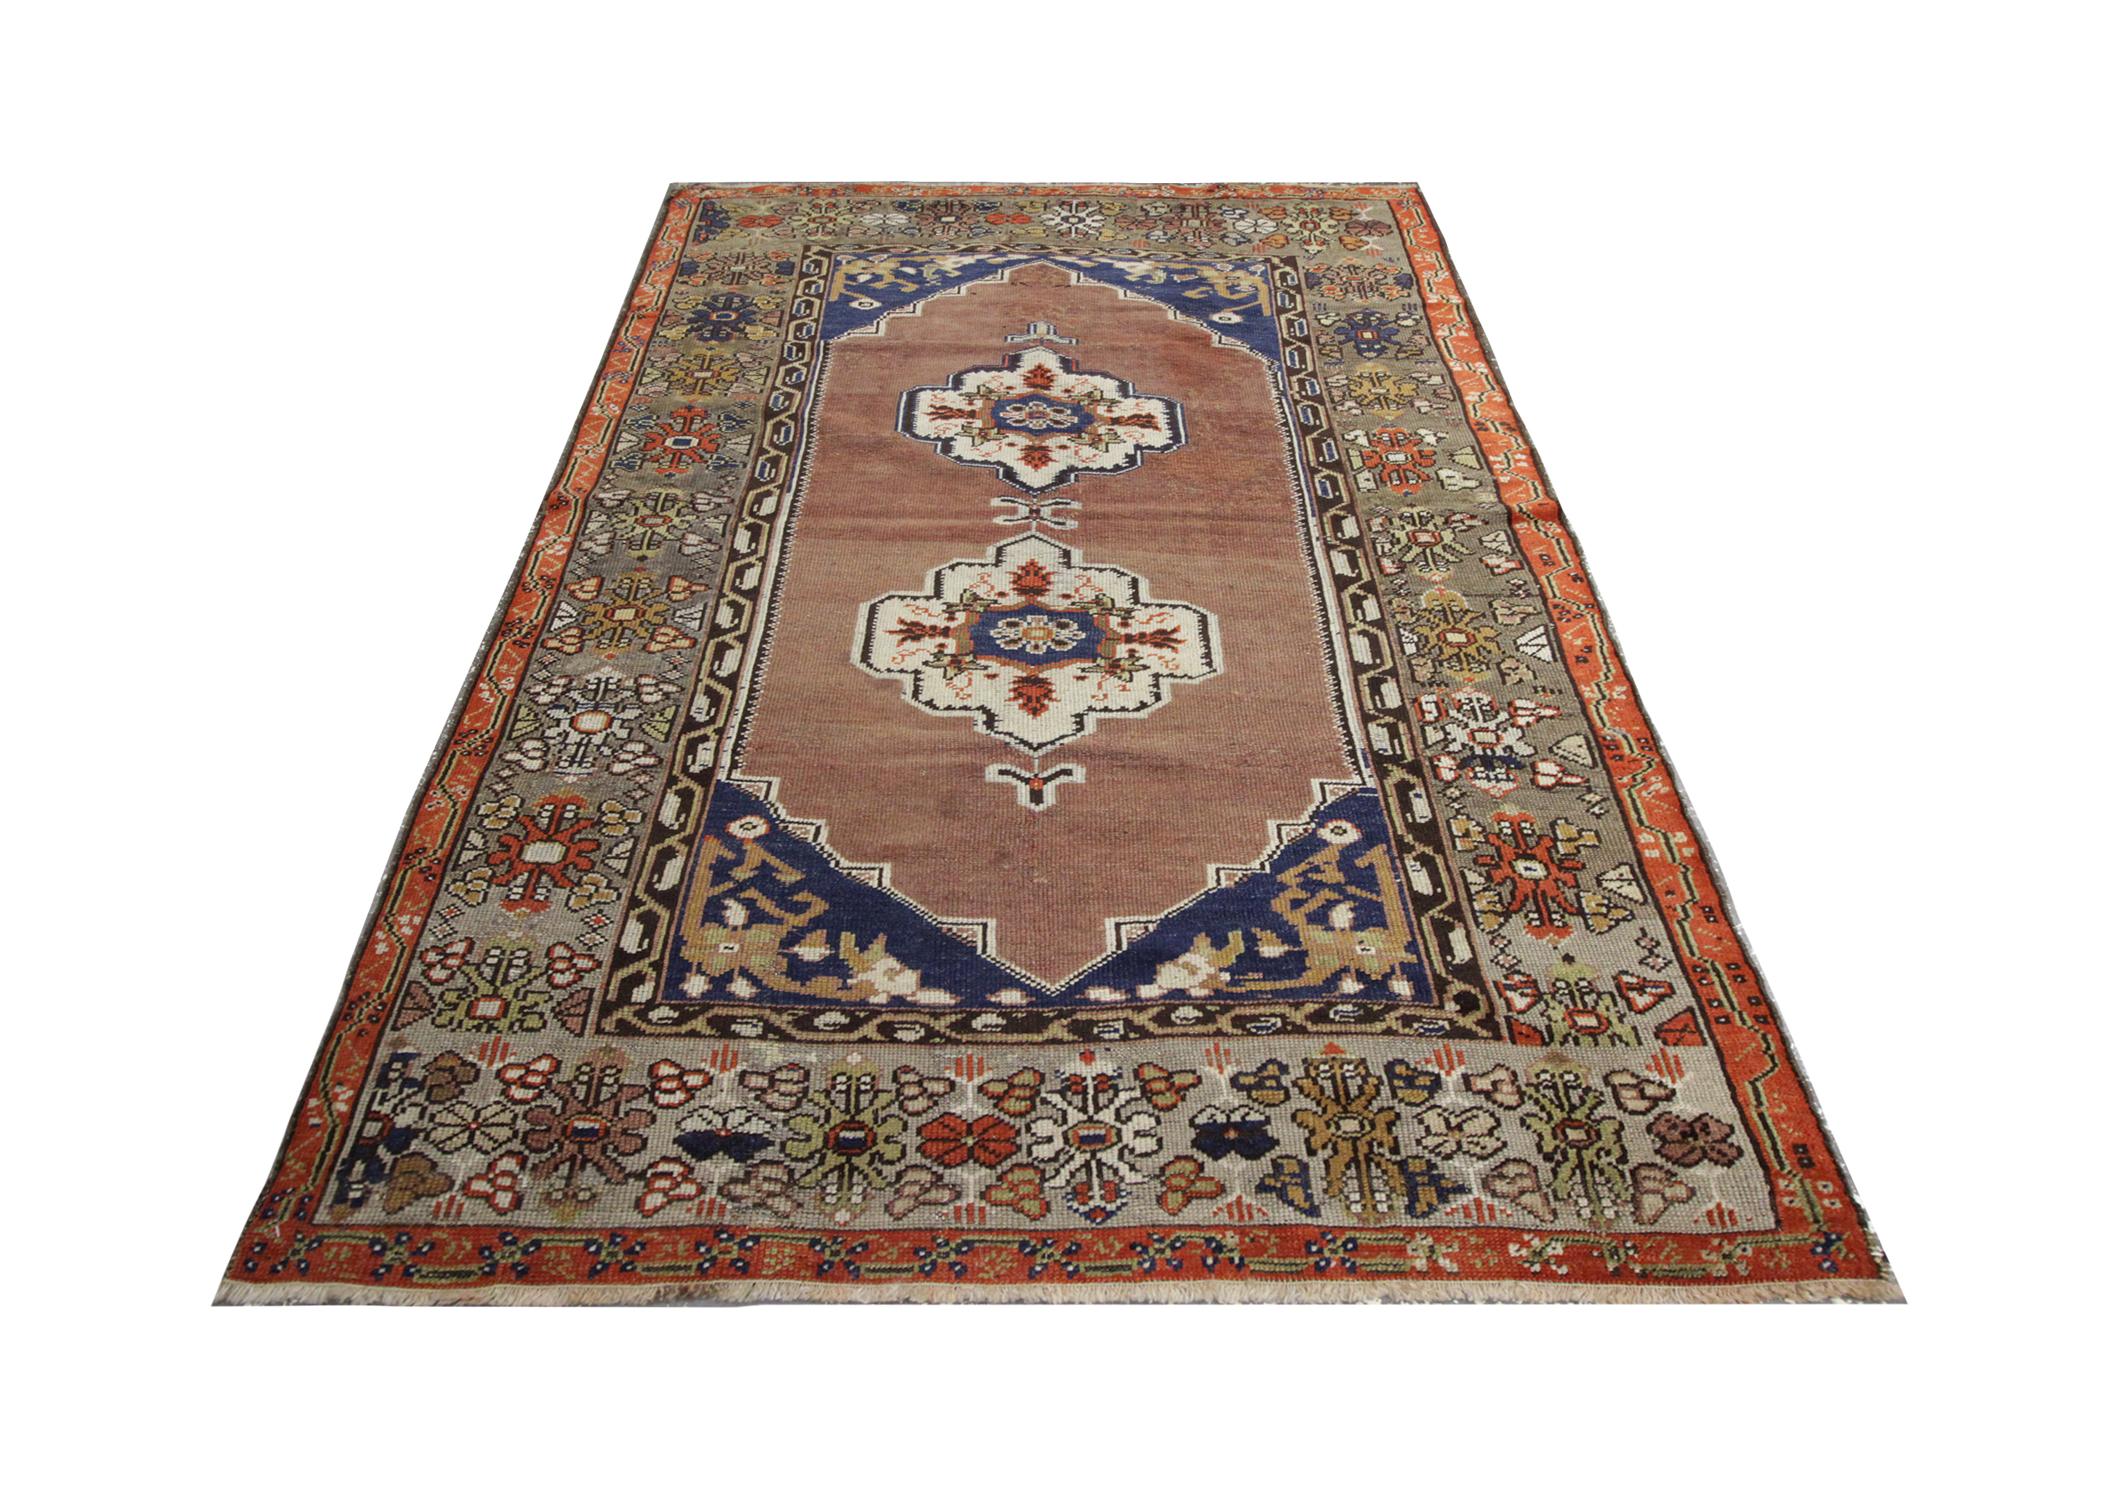 This high-quality Antique Turkish rug was handwoven in 1930 with hand-spun, vegetable-dyed wool, and cotton, by some of the finest Caucasian artisans. Featuring two central emblems, intricately woven with floral patterns on an orange background.